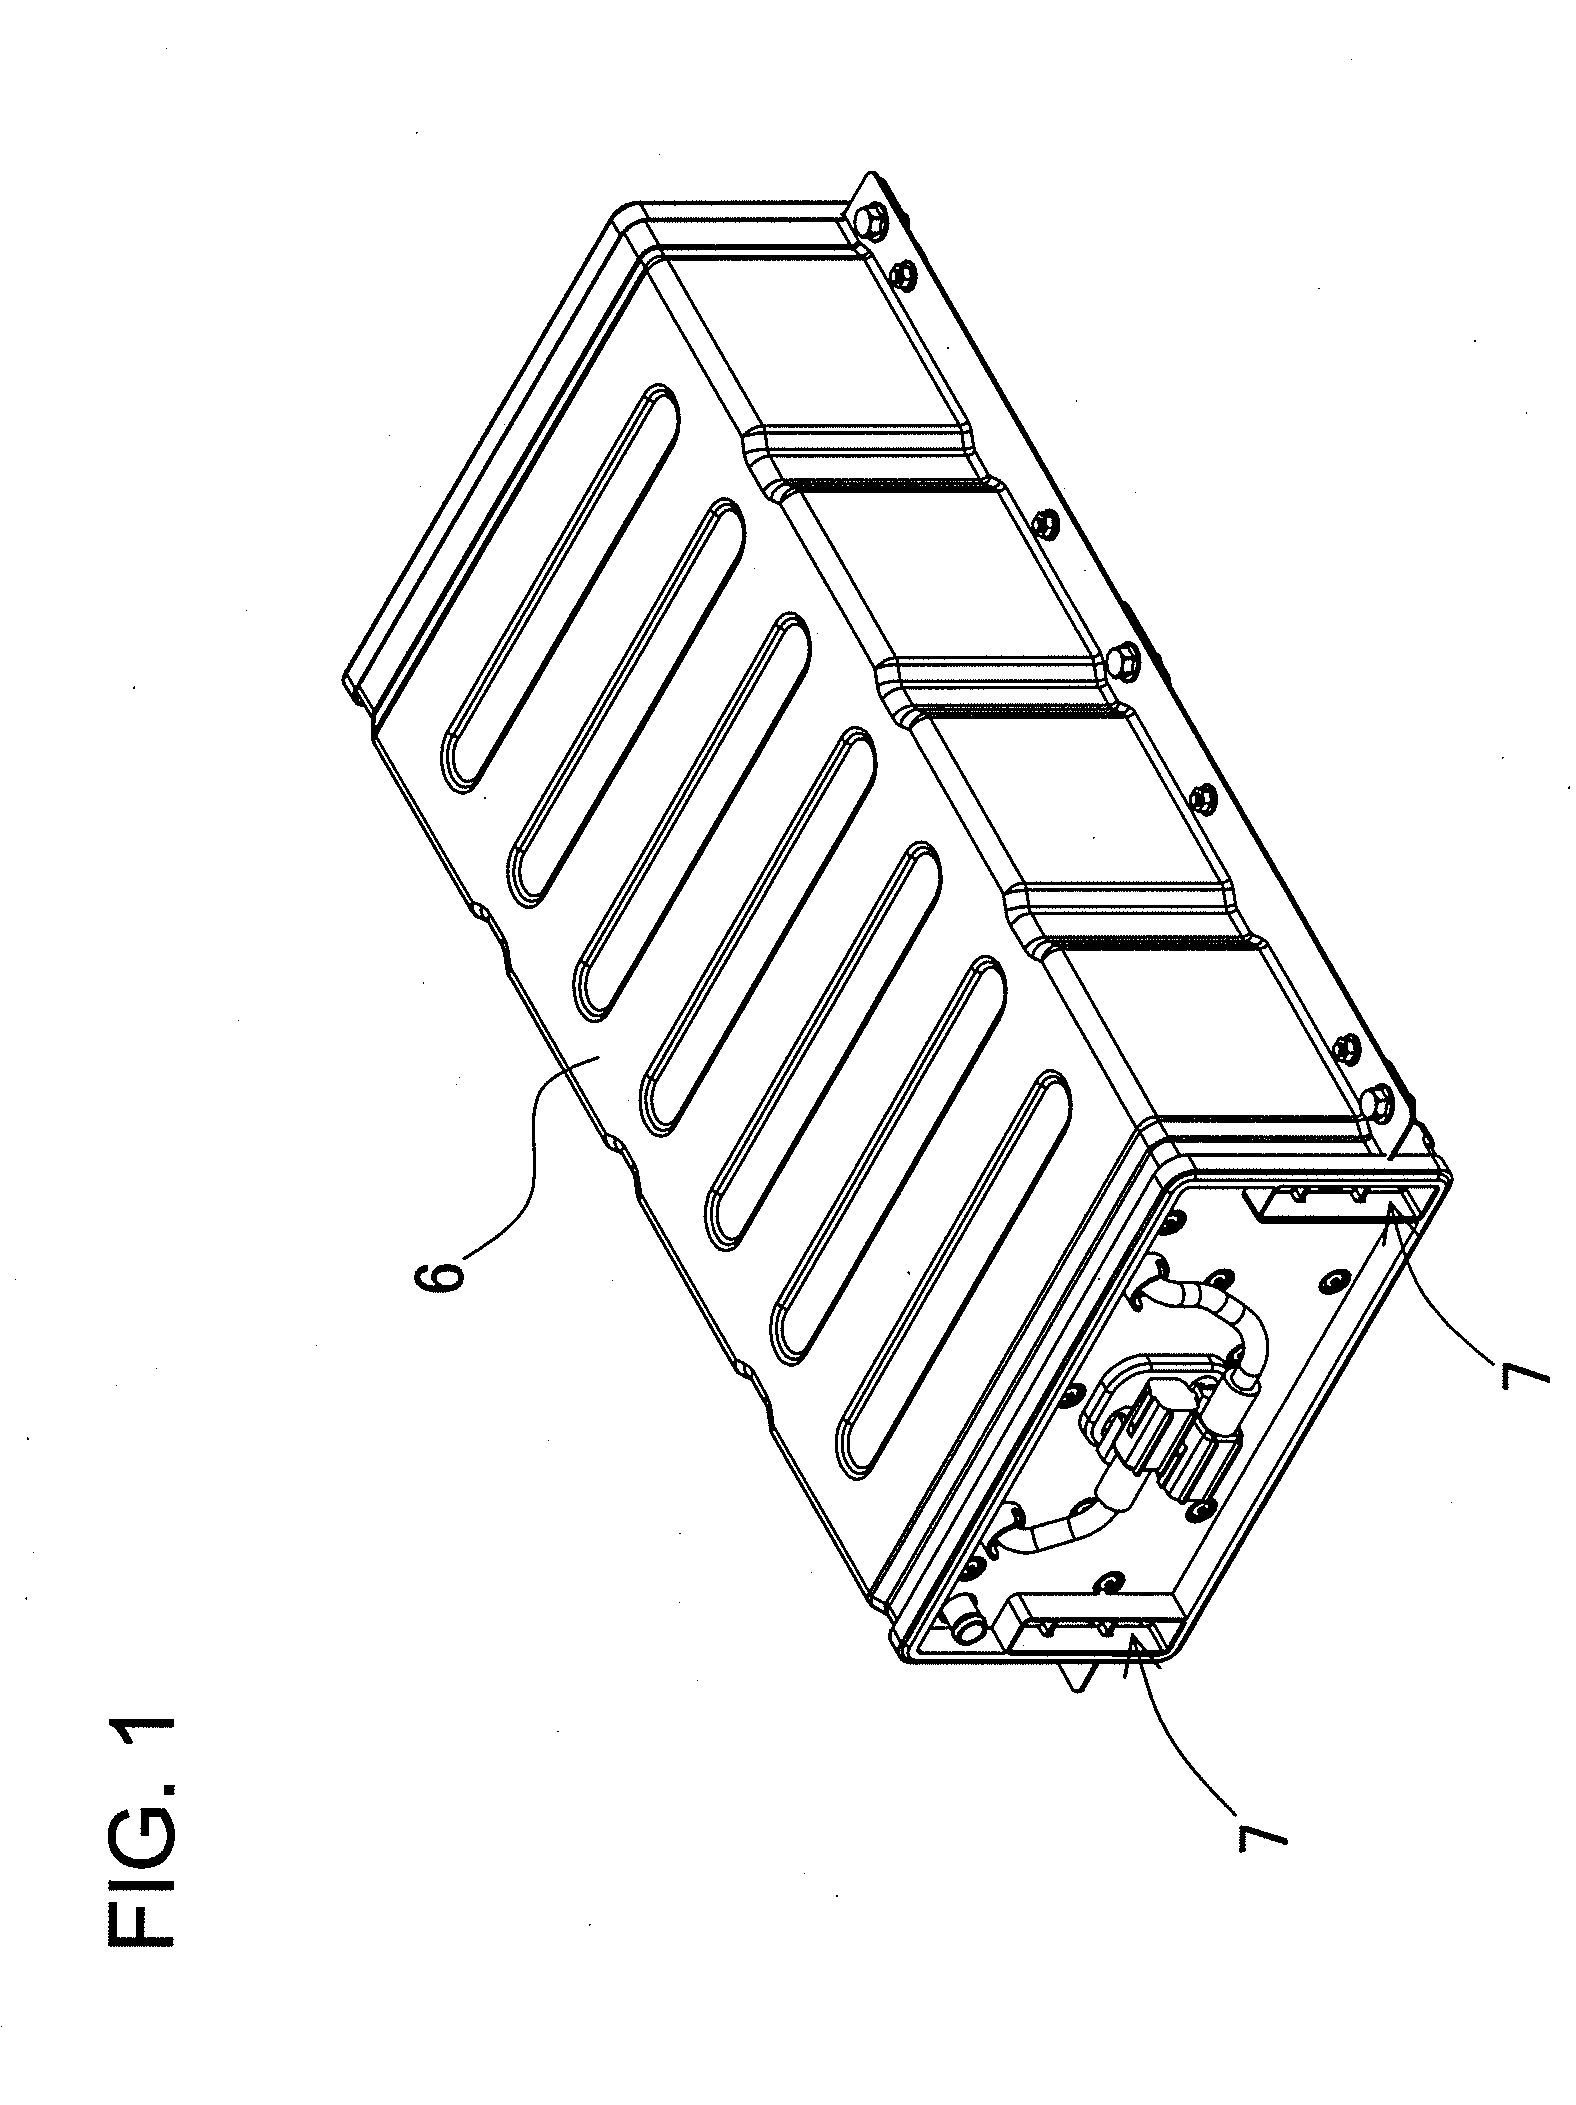 Battery array configured to prevent vibration